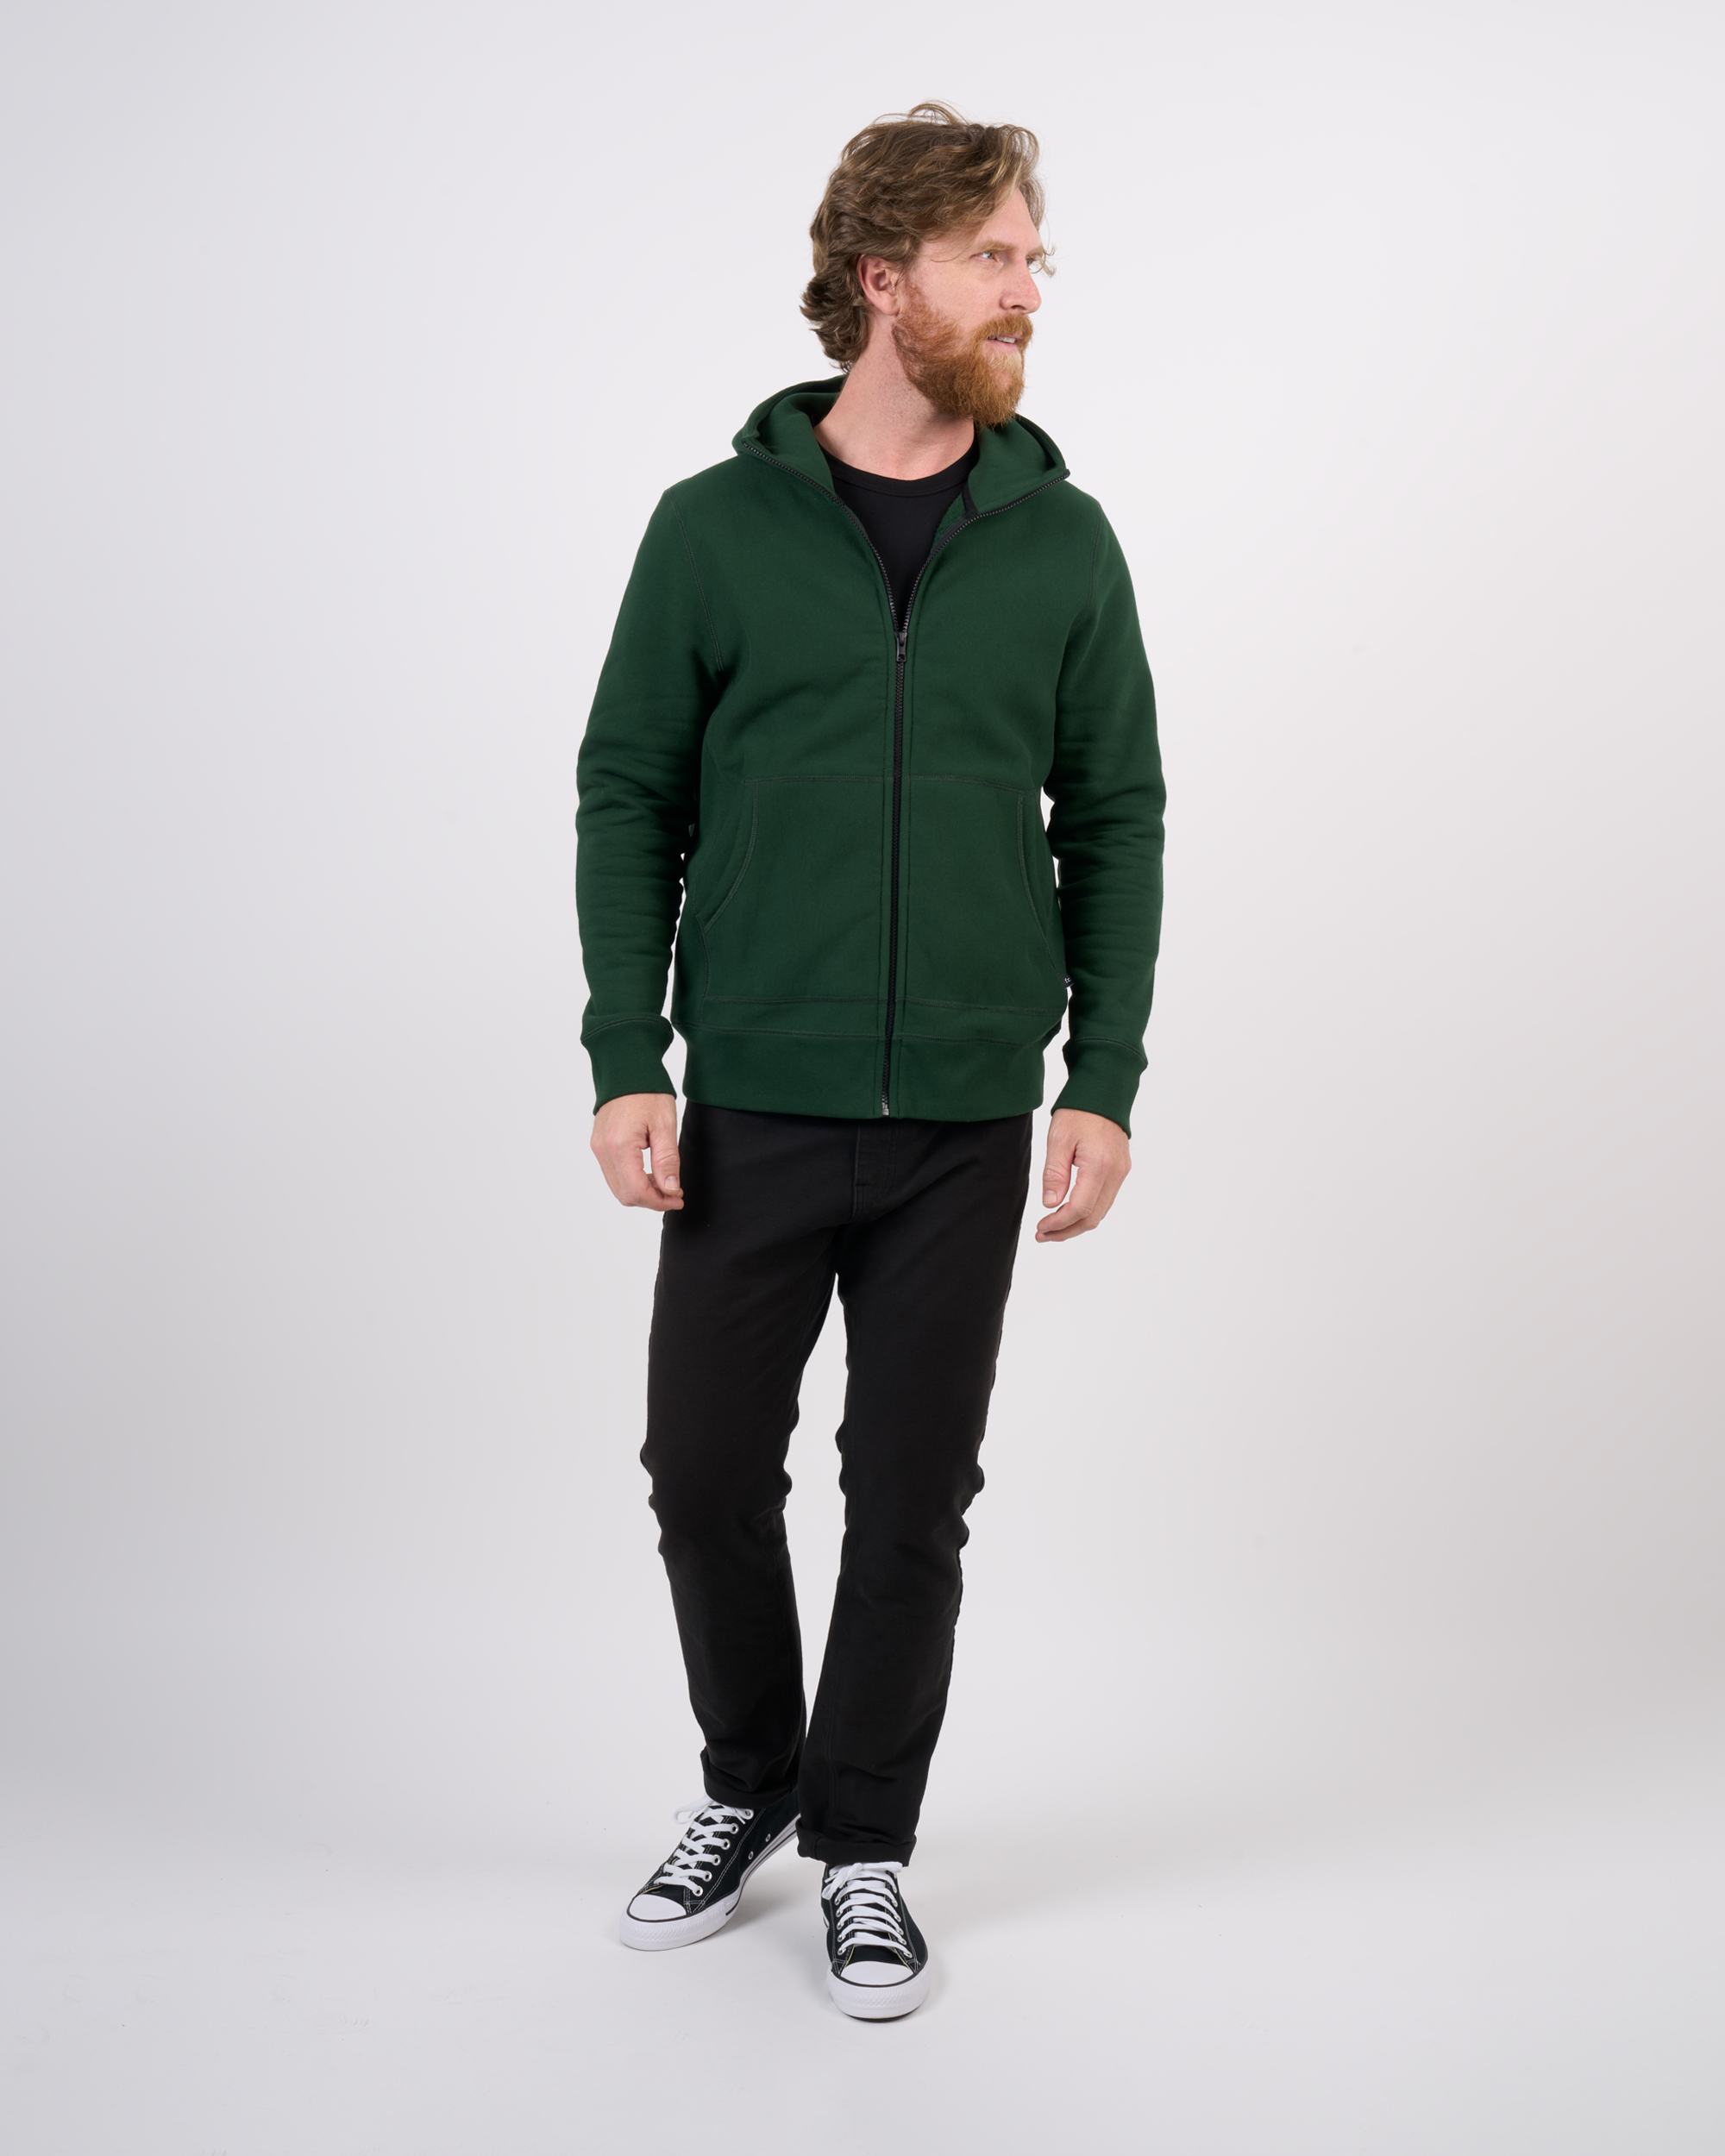 Foreign Rider Co Cotton Green High Neck Hooded Sweater Model size 3(L)